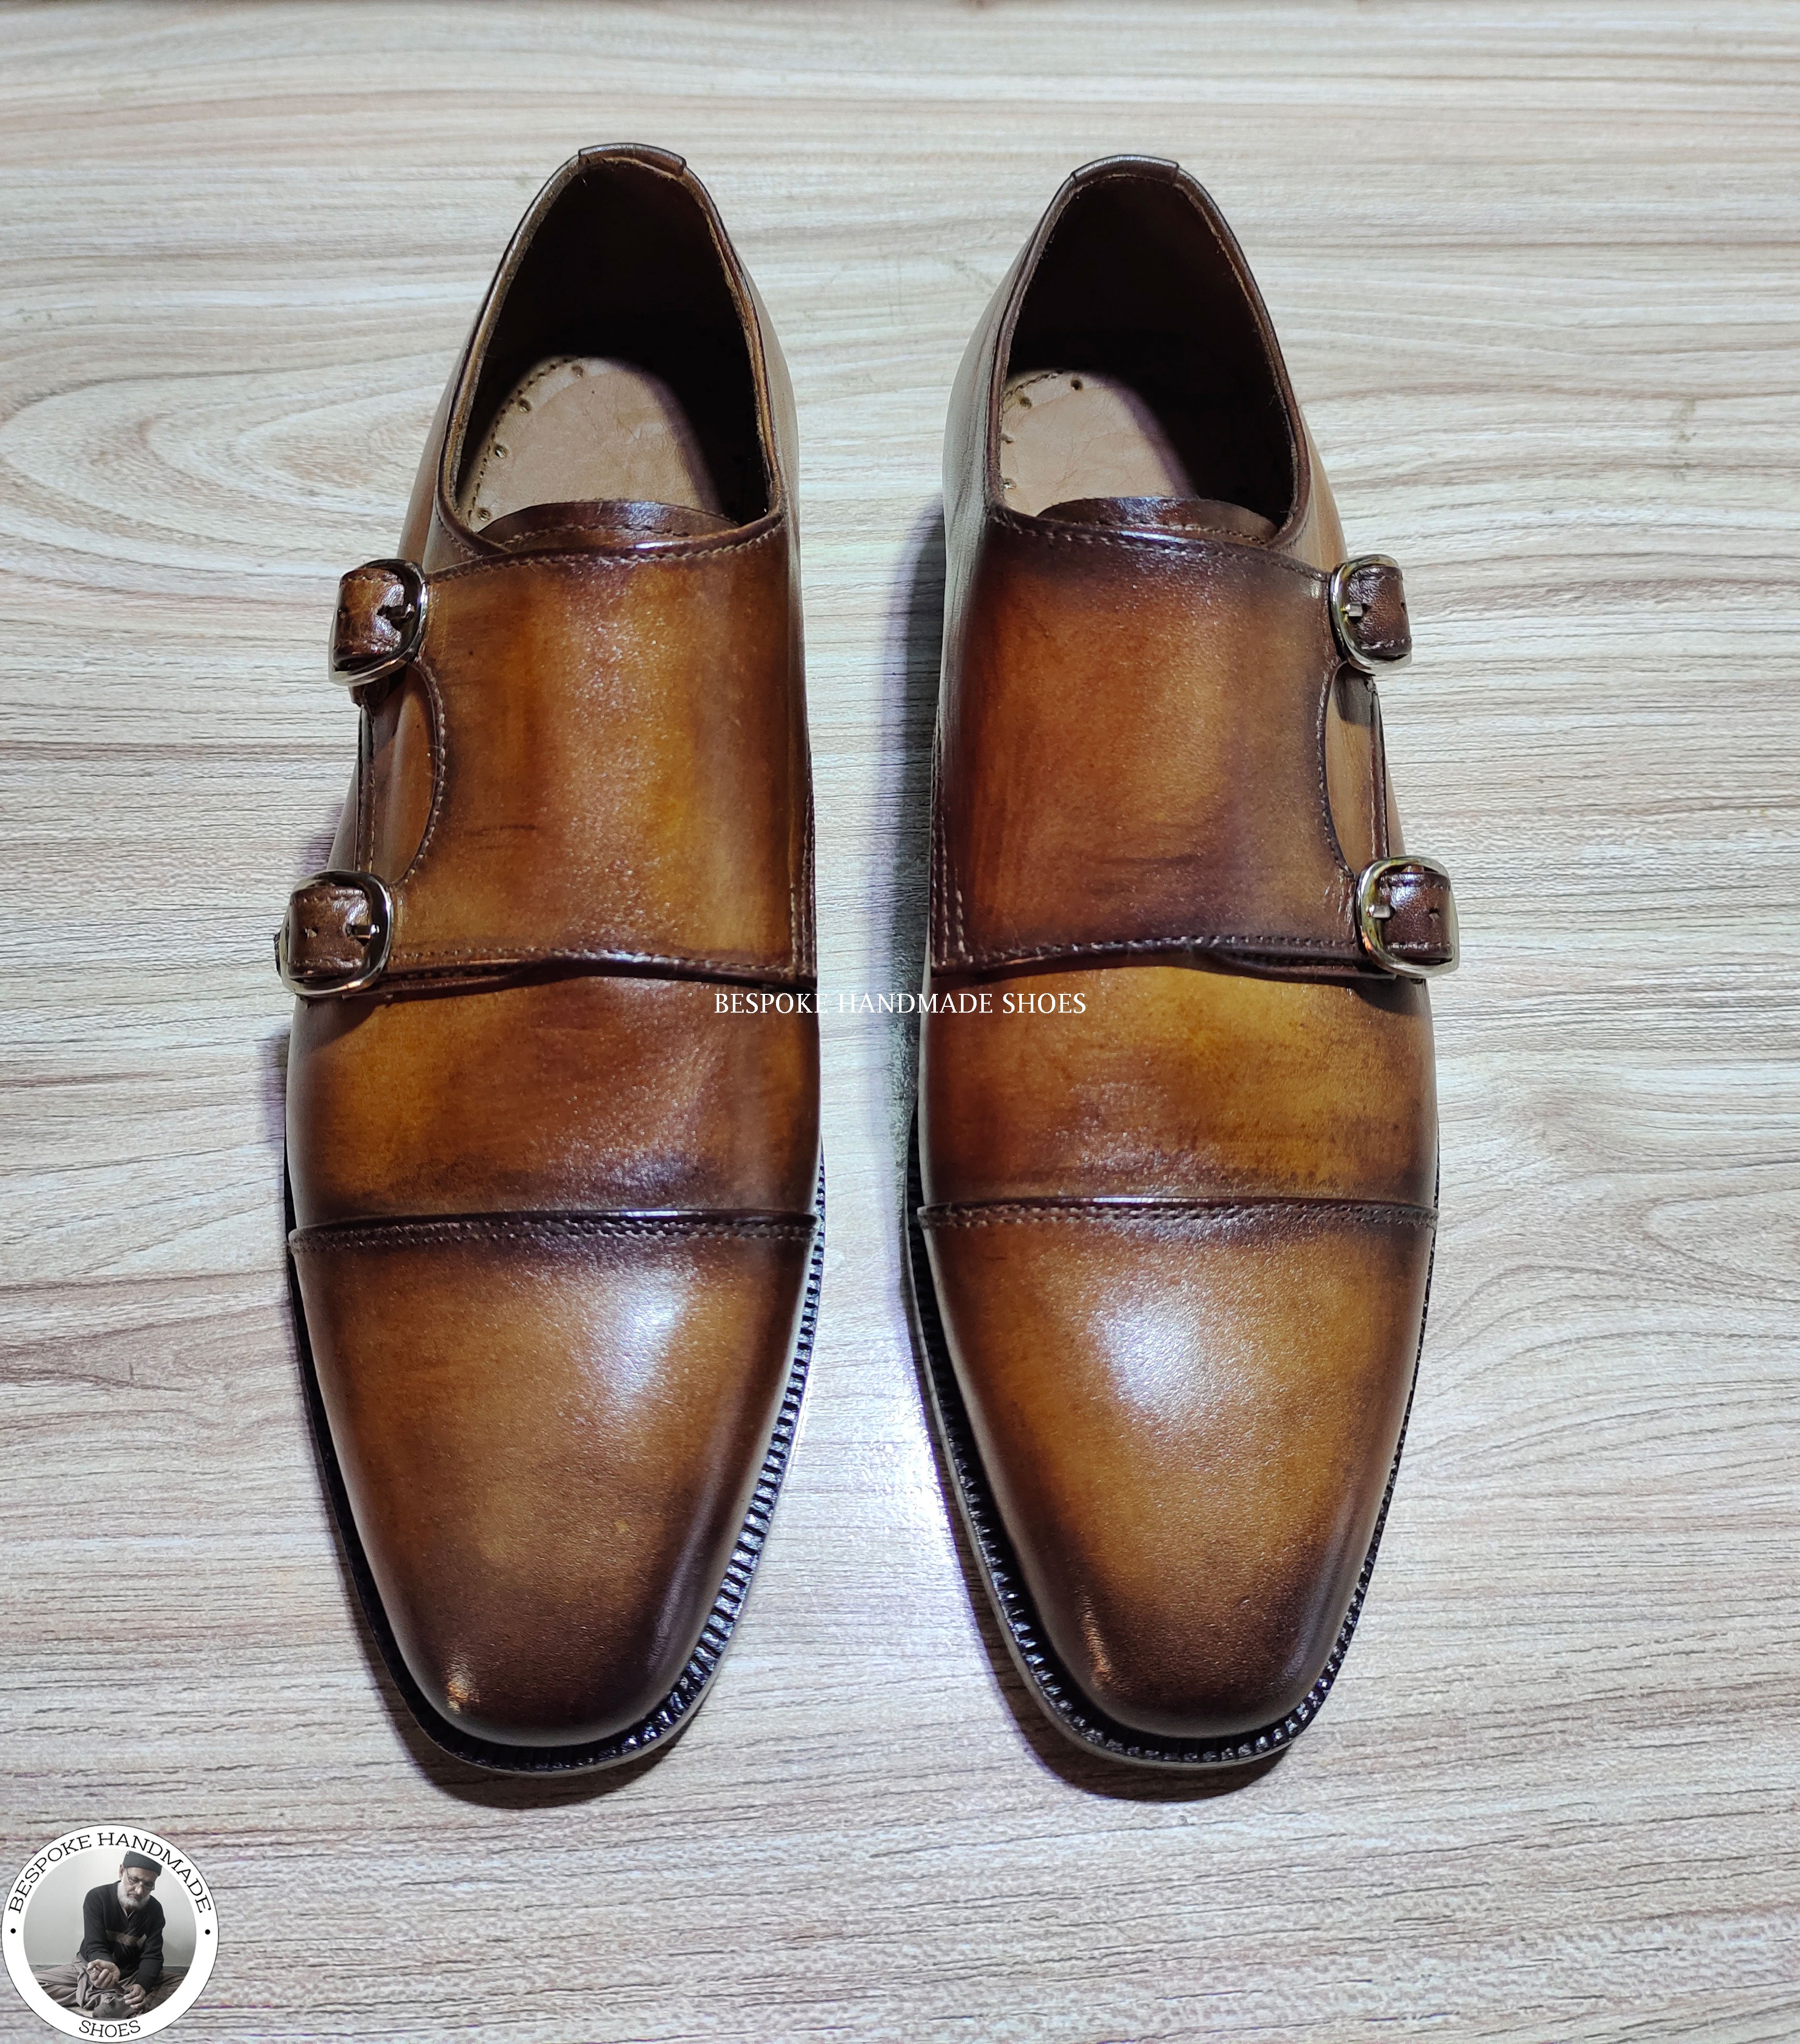 Bespoke Handcrafted Dress Shoes, Brown Color Premium Quality Double Monk Strap And Cap toe Casual Shoes